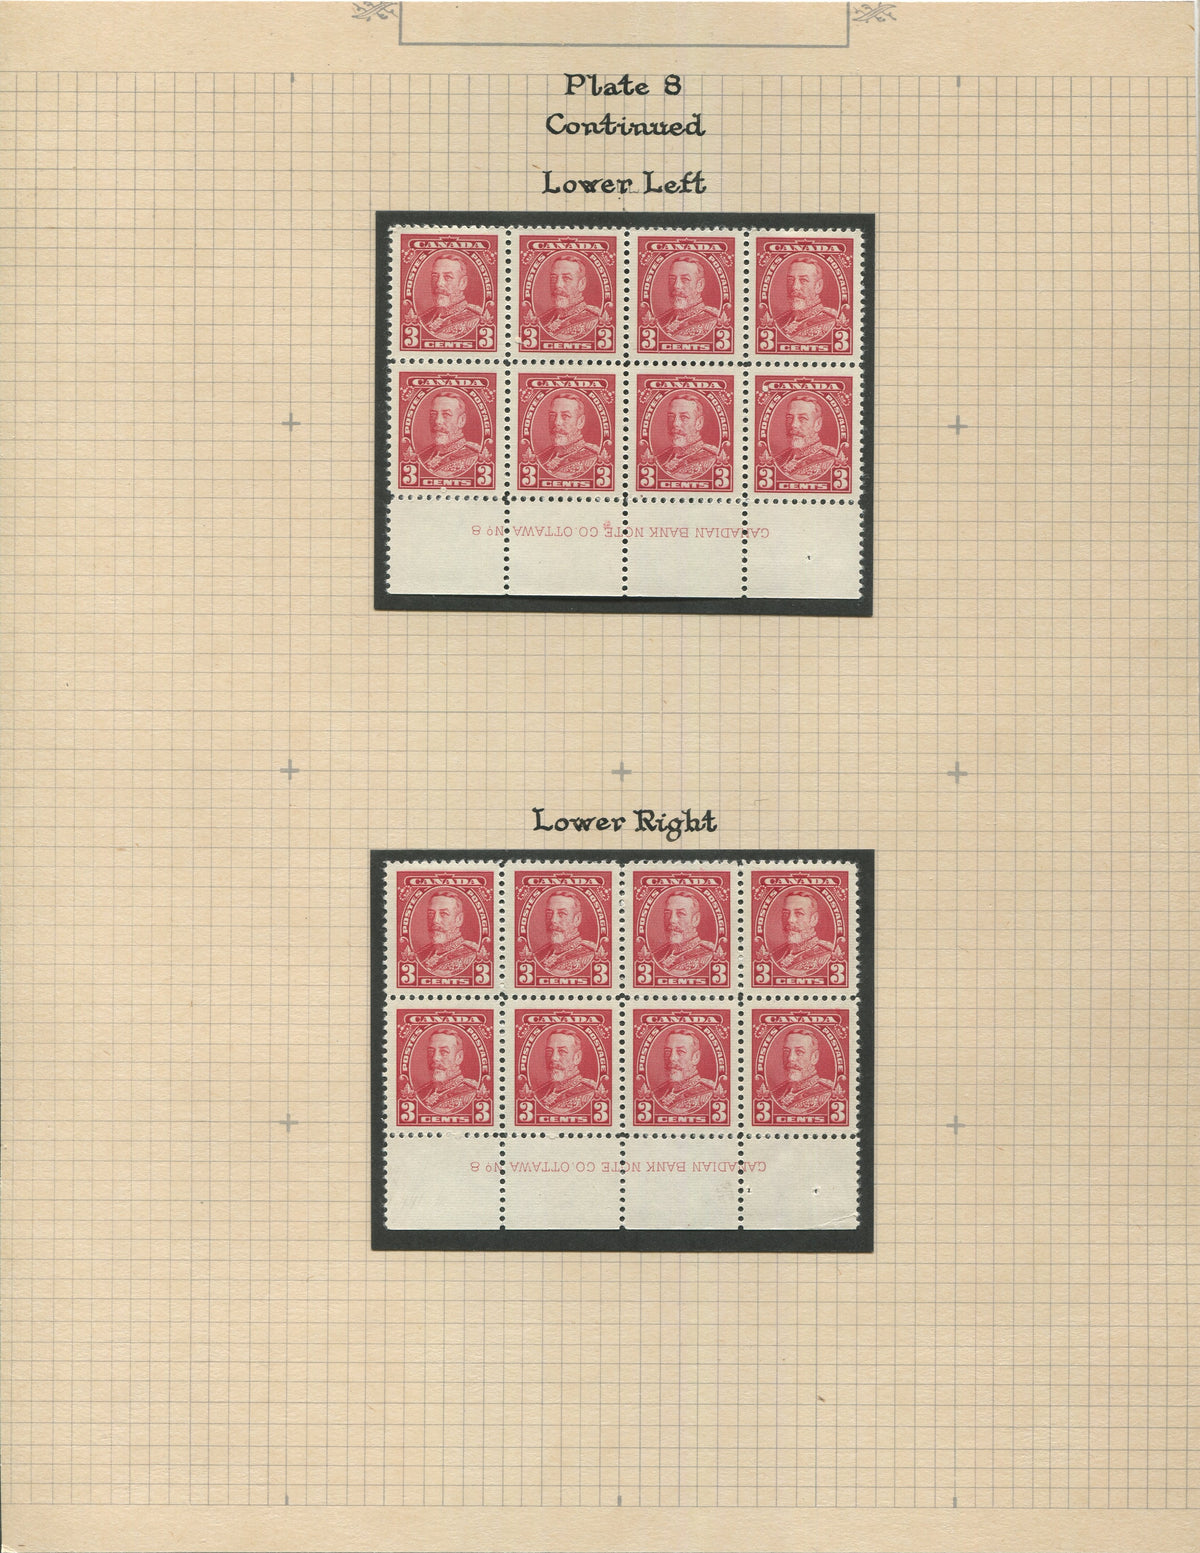 0219CA2209 - #219 Mint Plate Block Collection